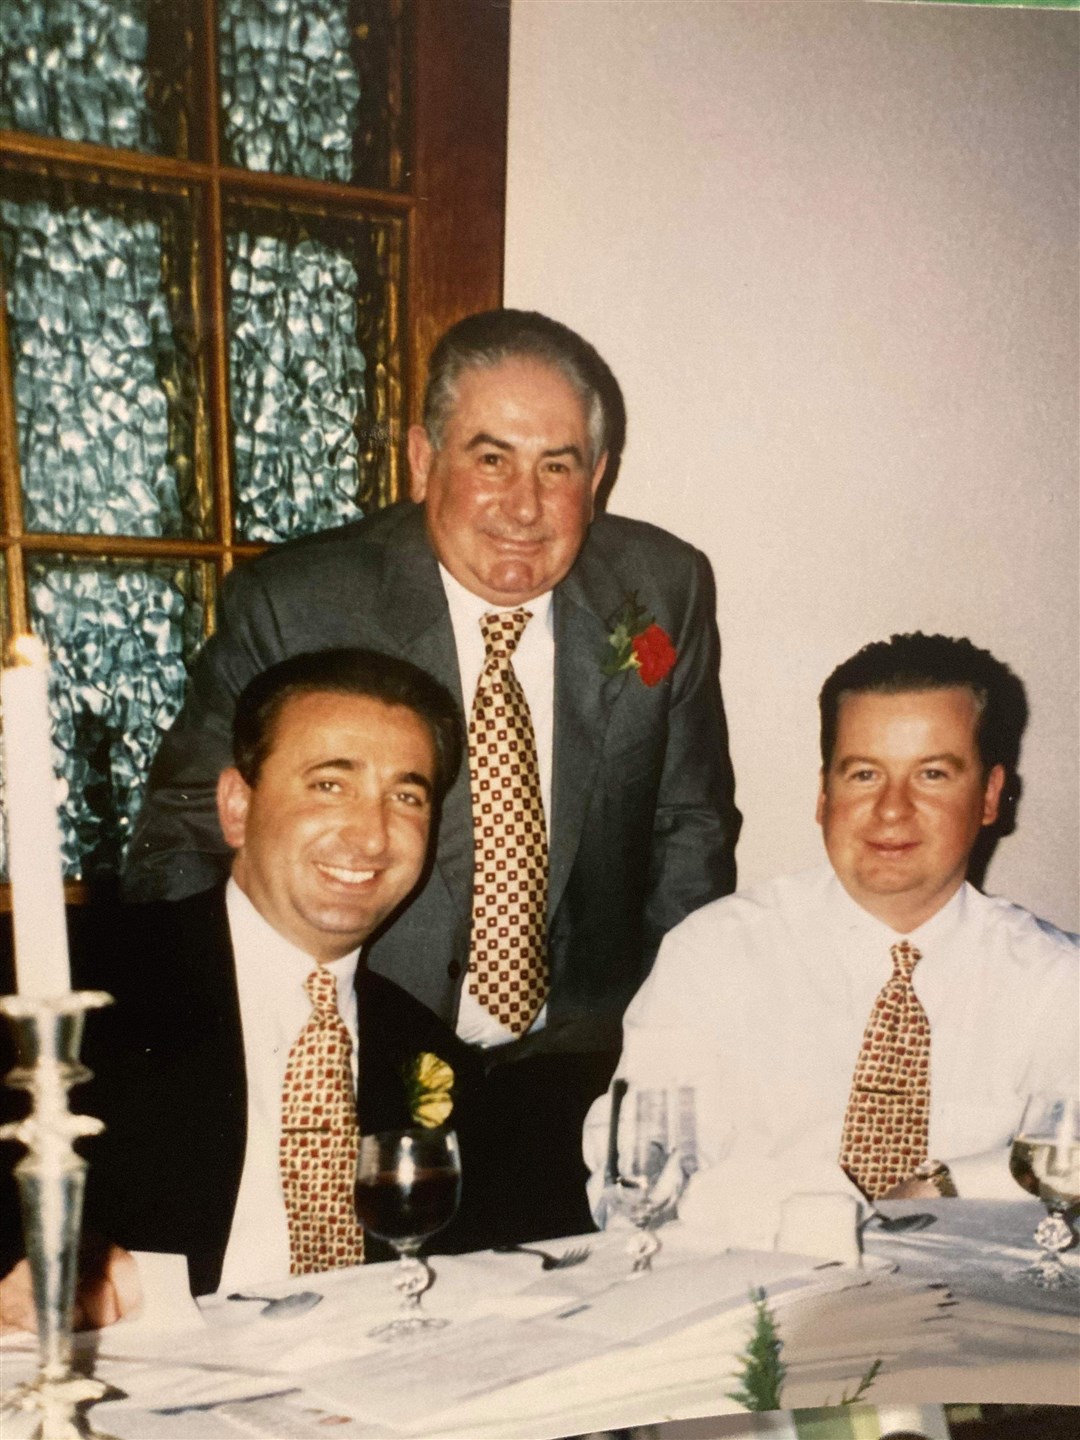 Renato Onesti is flanked by son Roberto (right) and nephew Adrian Pieraccini.